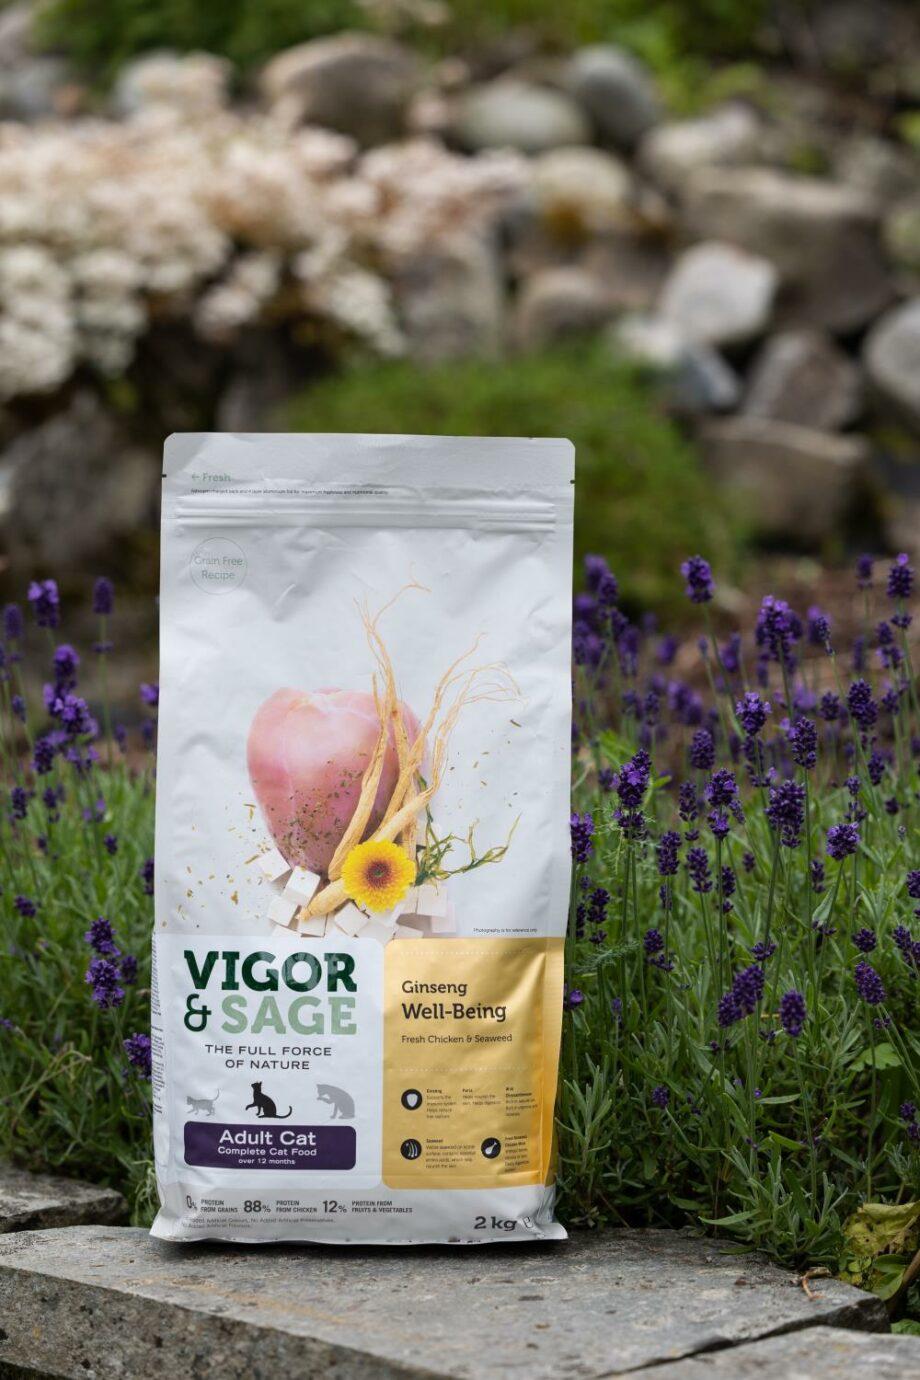 2051 16583 1 920x1380 - Vigor & Sage Ginseng Well-Being Adult Cat Food 2KG